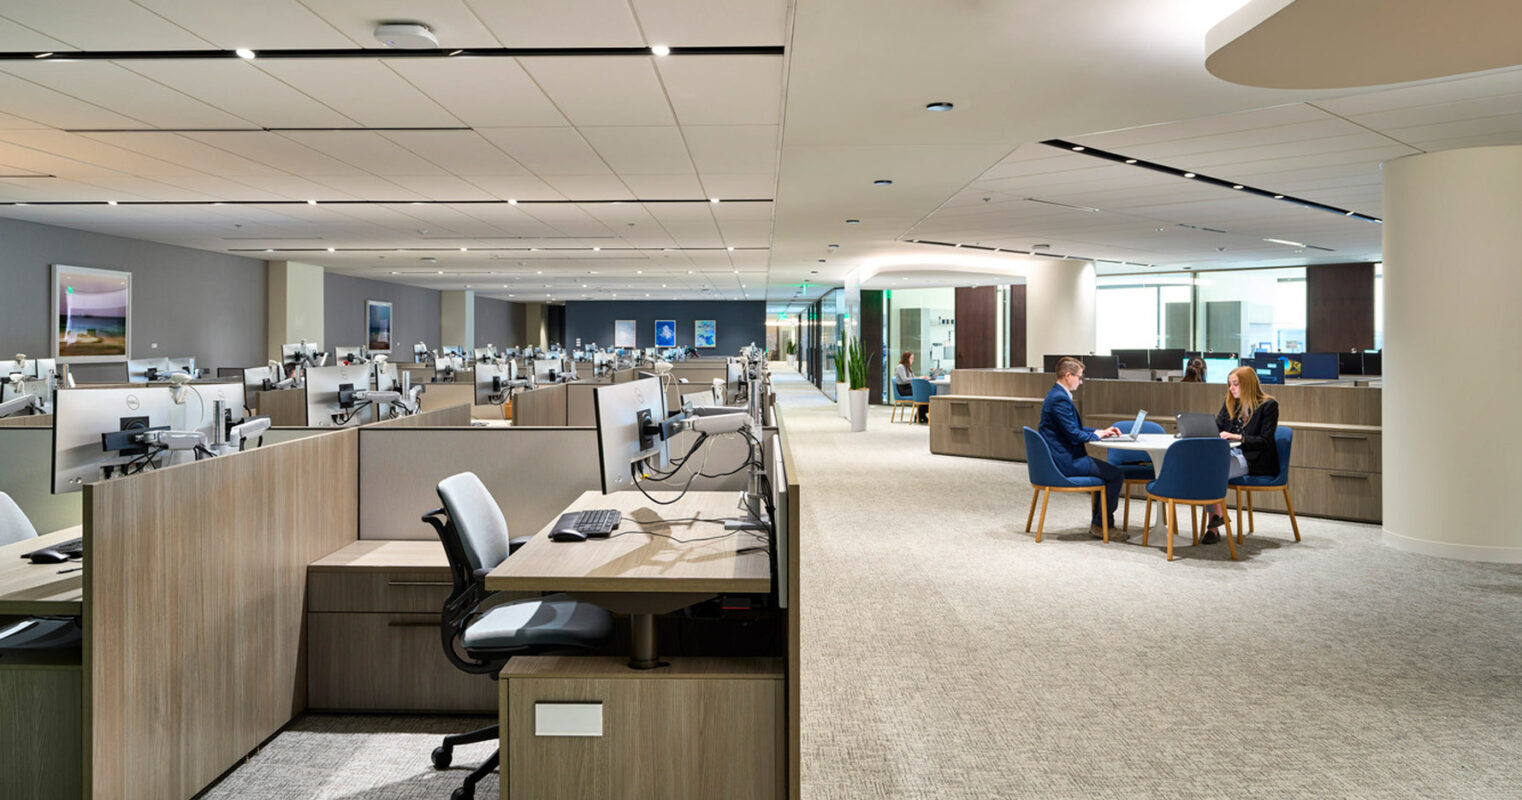 Open-plan office space featuring neutral-toned modular workstations with ergonomic chairs. Overhead, acoustic ceiling panels pair with curved lighting elements. In the foreground, a collaborative area with a wooden table and upholstered blue chairs provides a contrast to the gray carpeted floors.